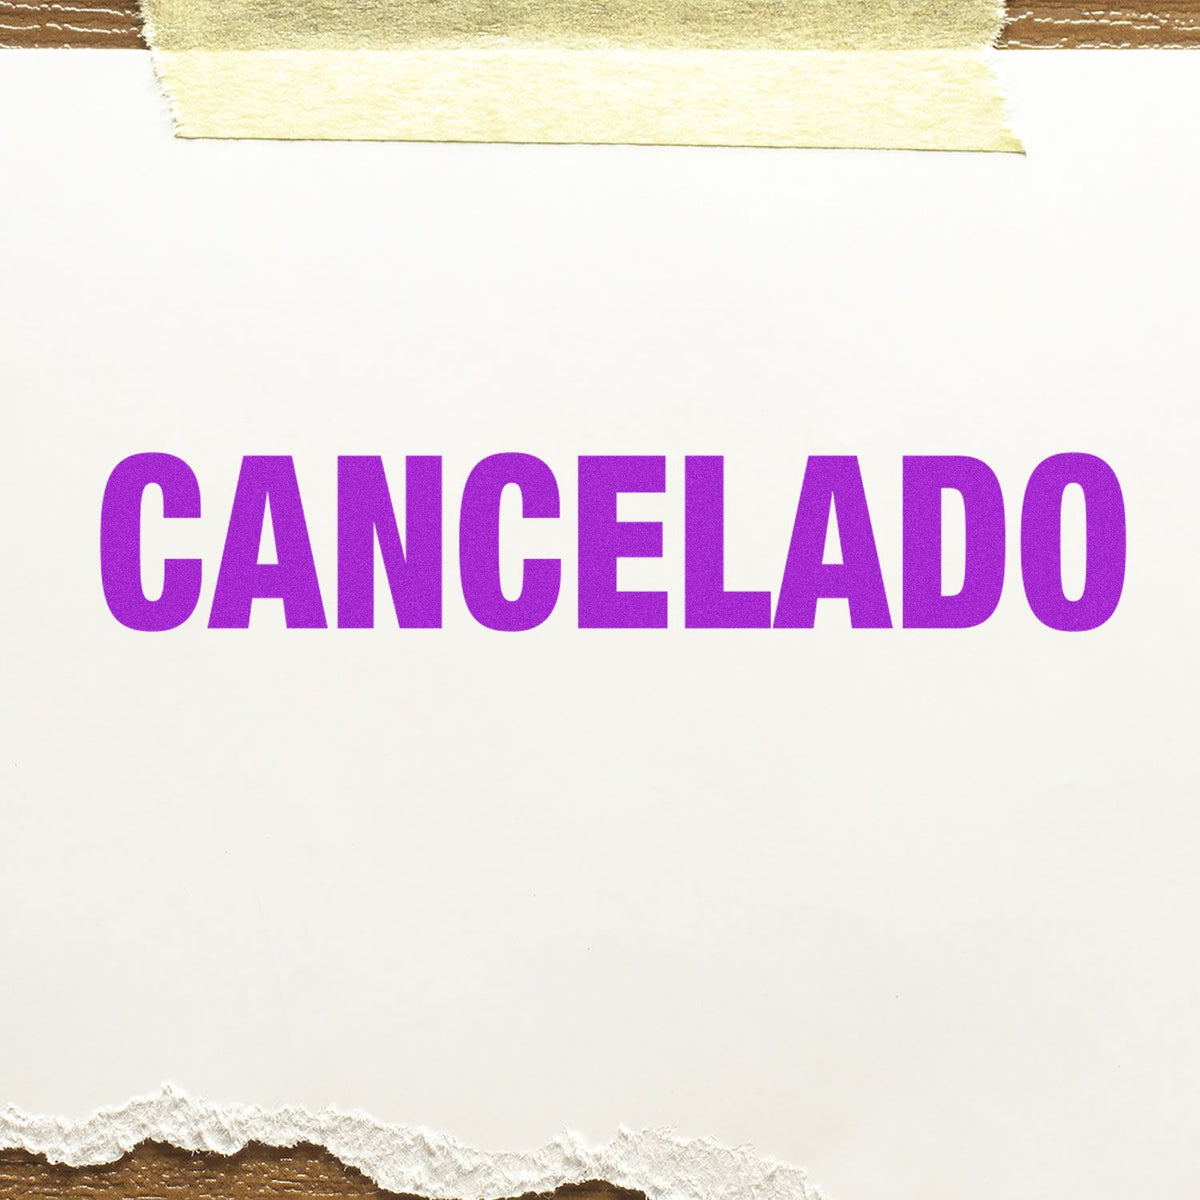 Self-Inking Cancelado Stamp In Use